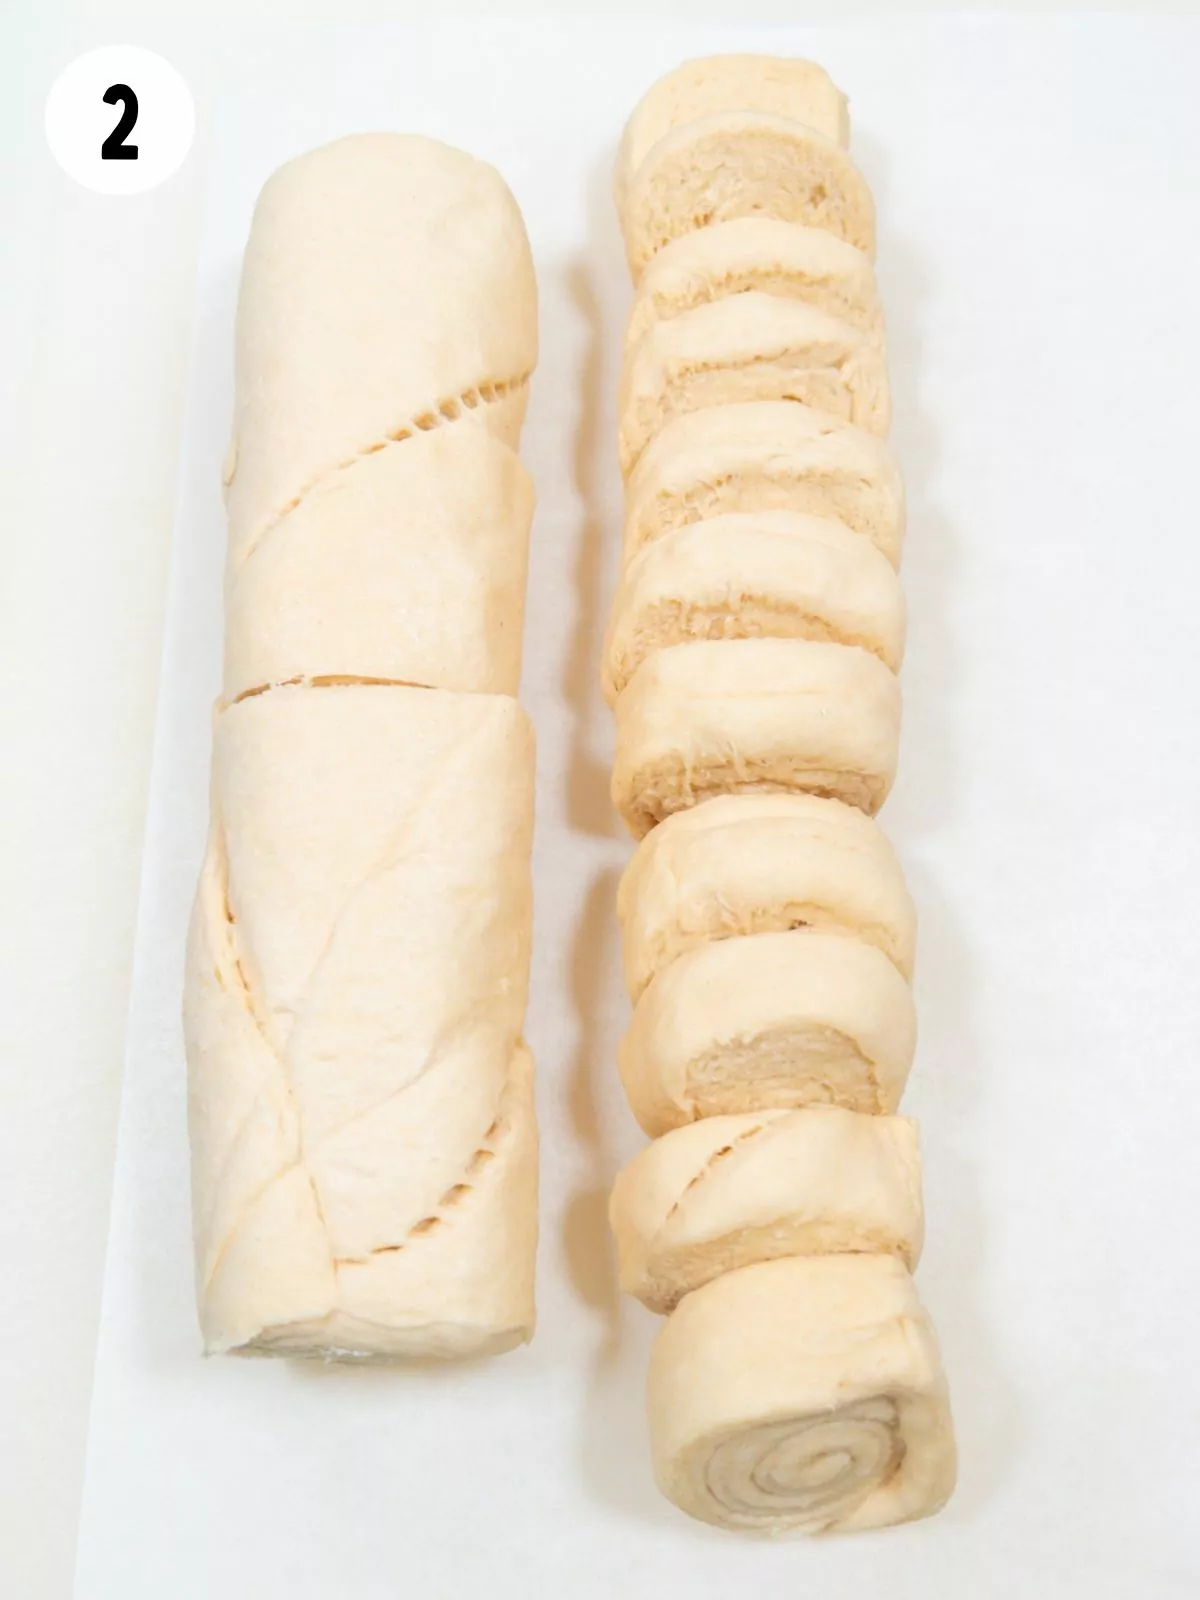 Sliced crescent roll dough on parchment paper.